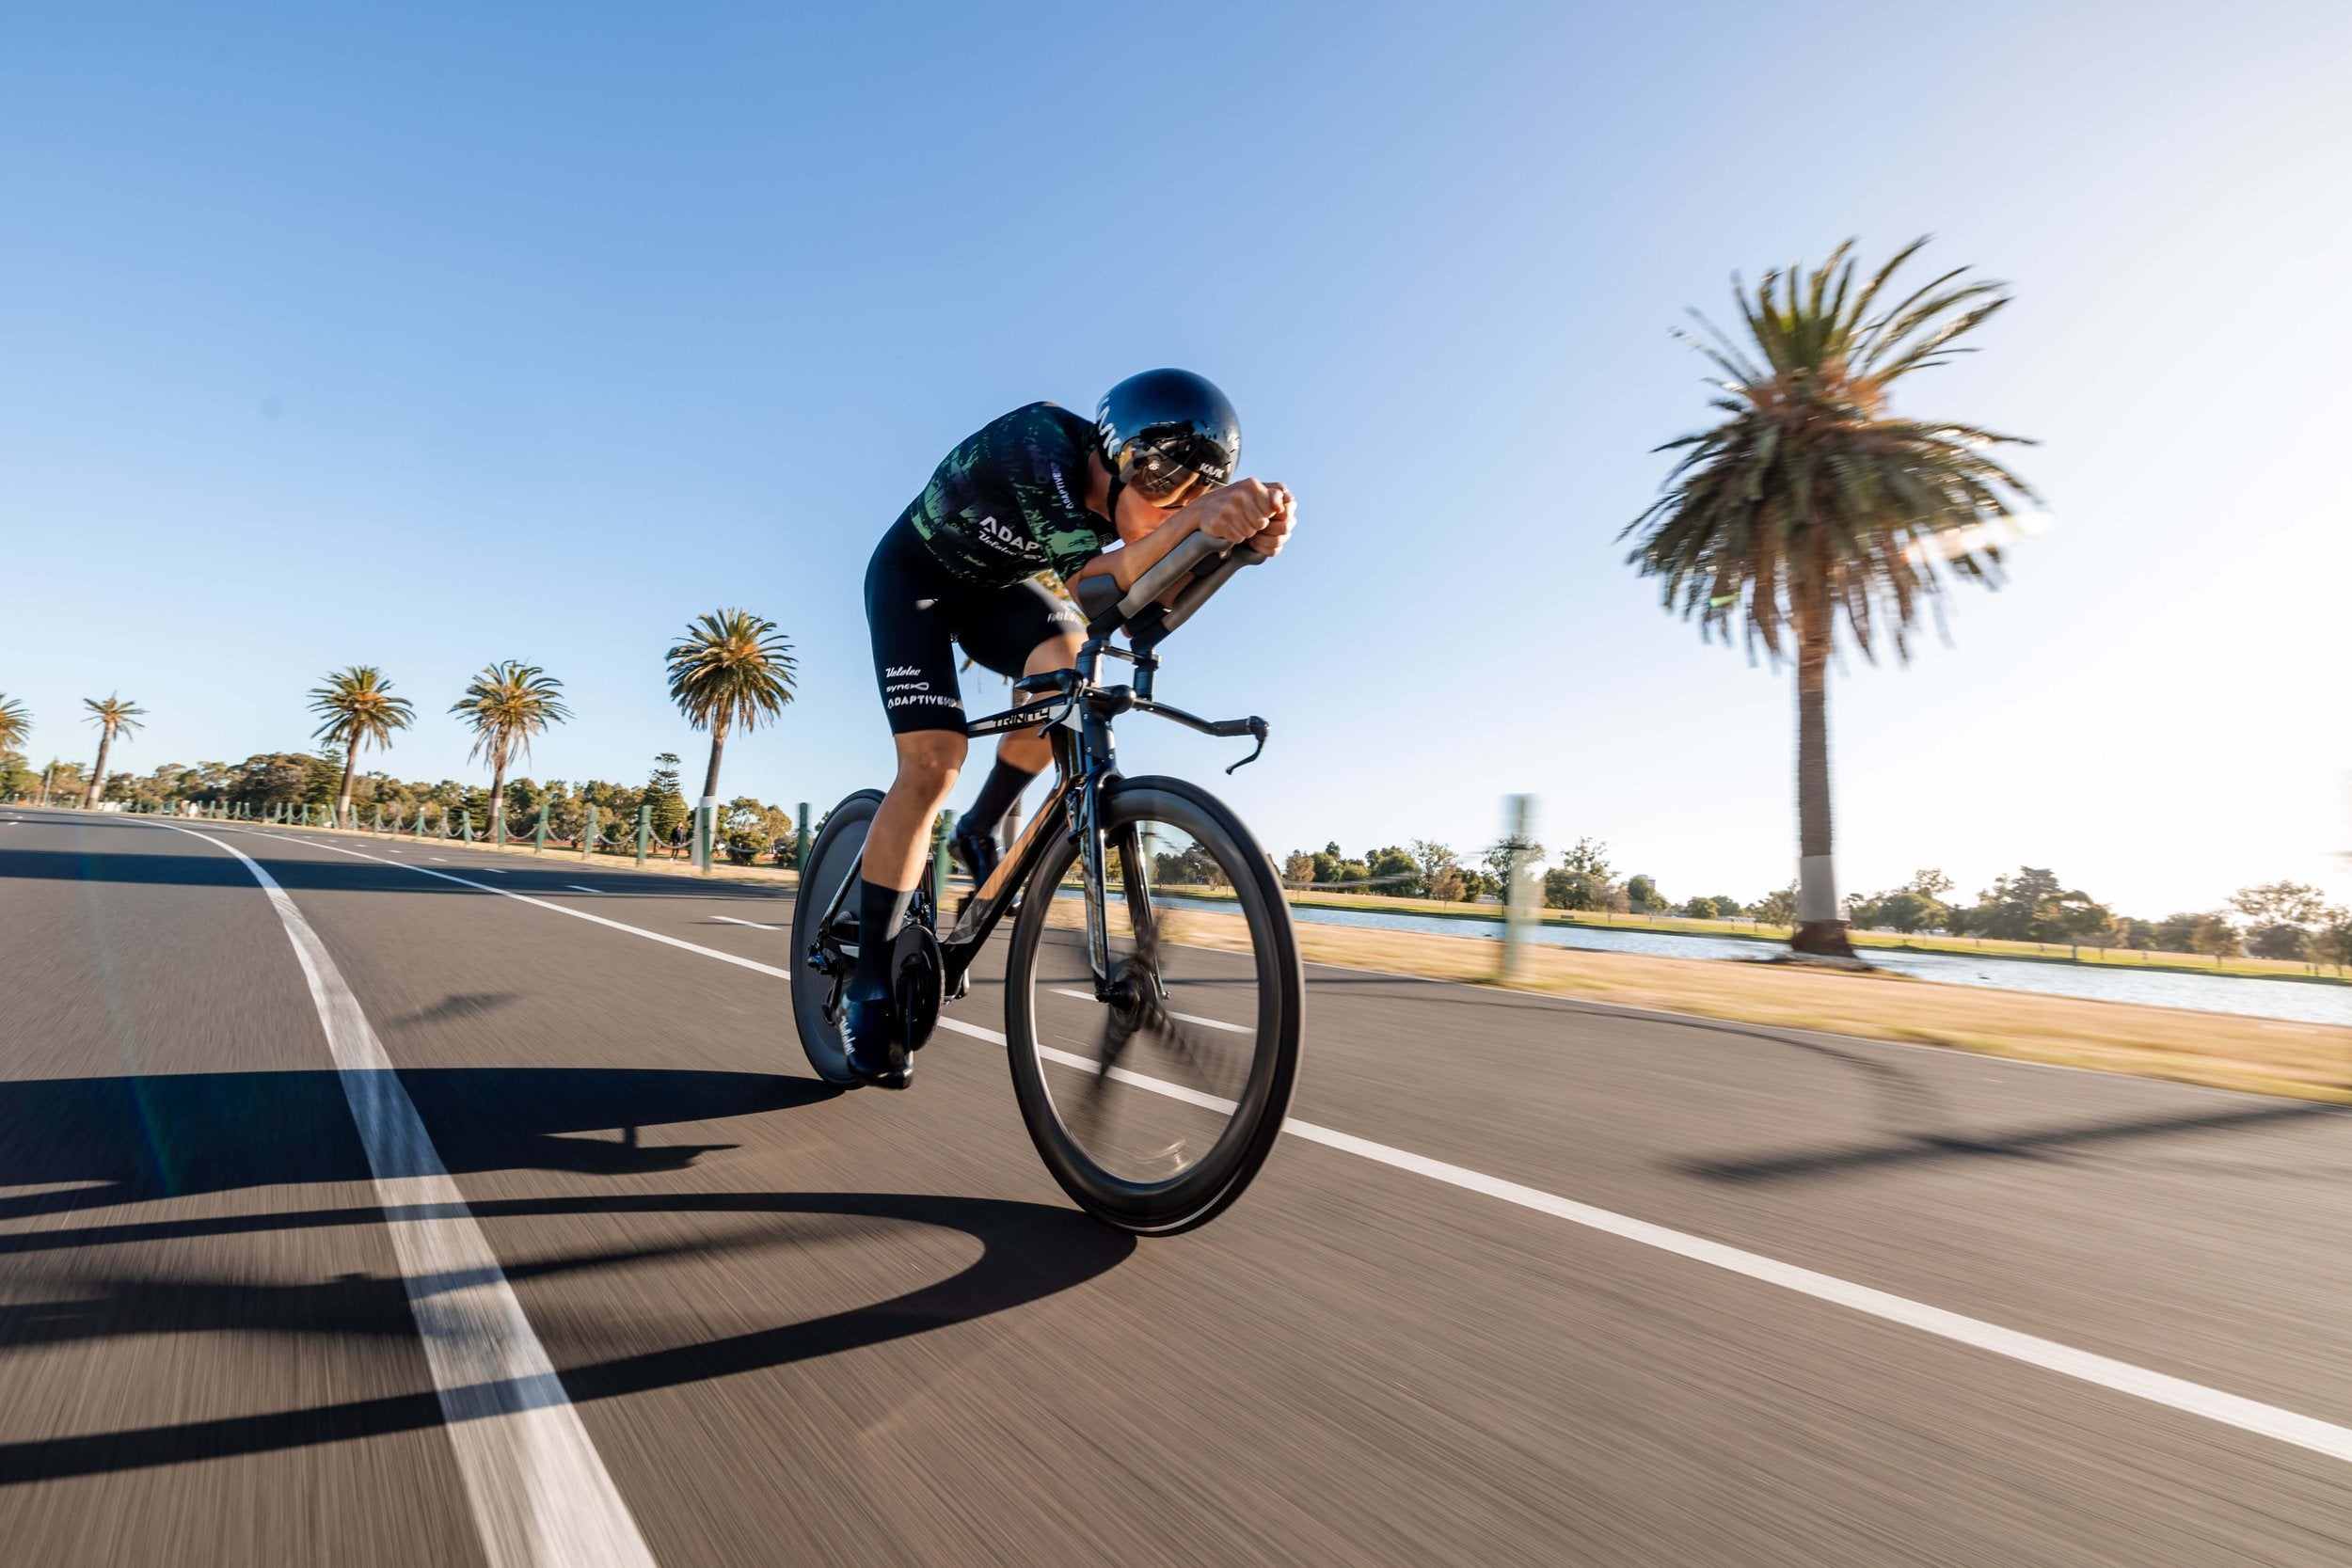 Aero speed suits and custom cycling wear